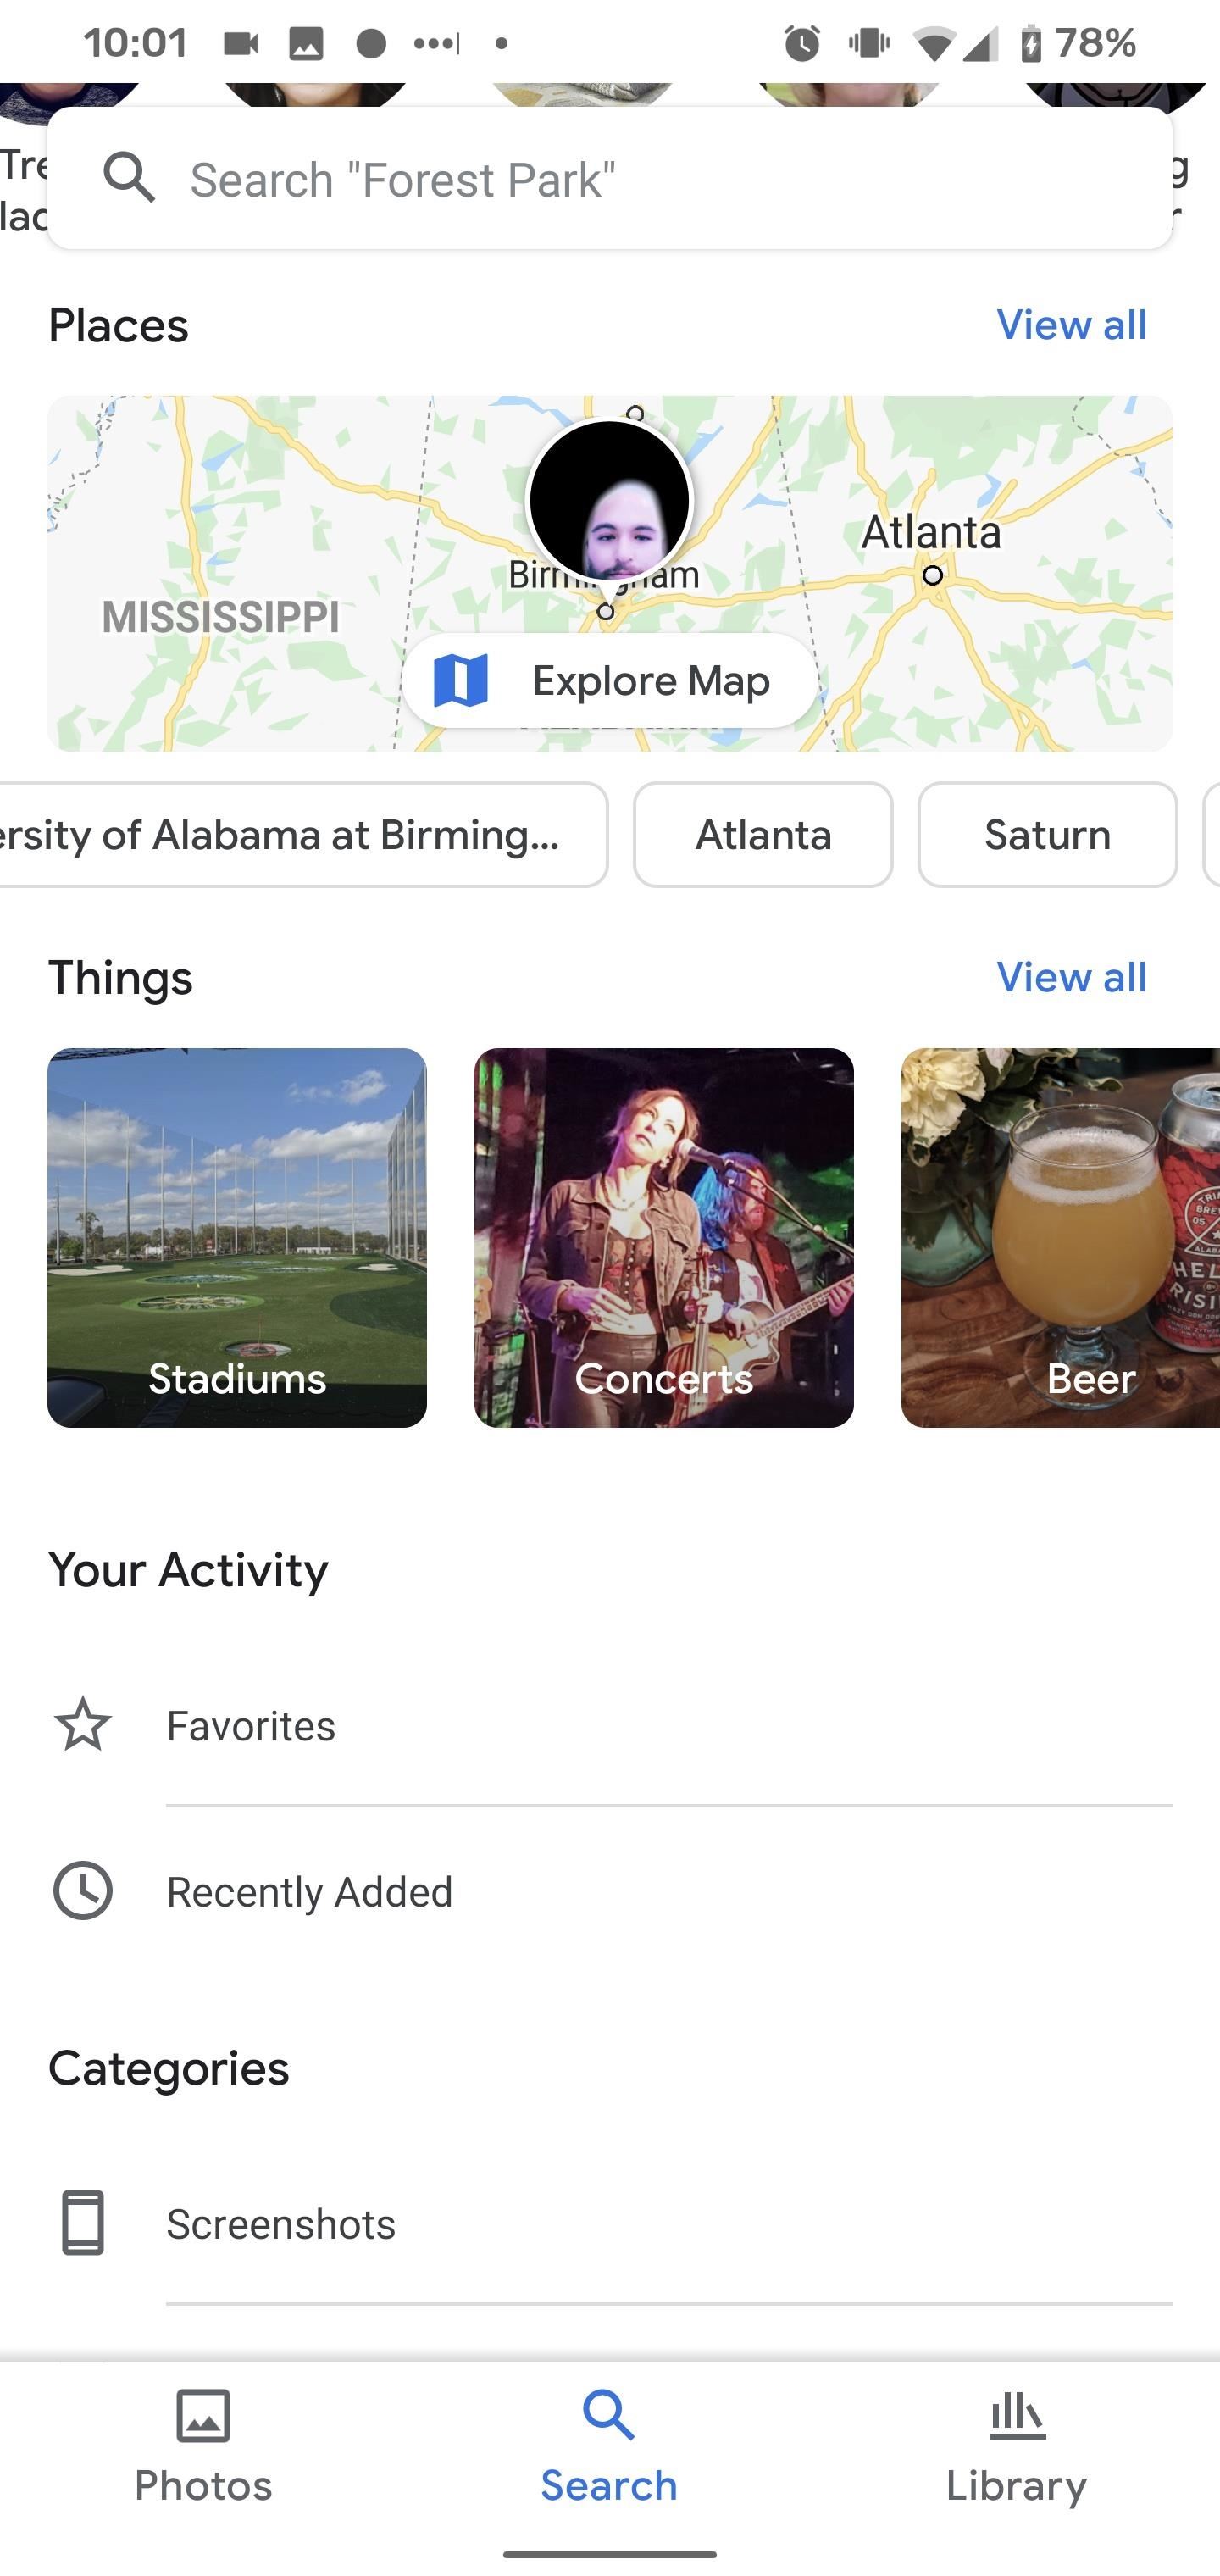 How to See All the Pictures You've Taken with an Interactive Heat Map in Google Photos